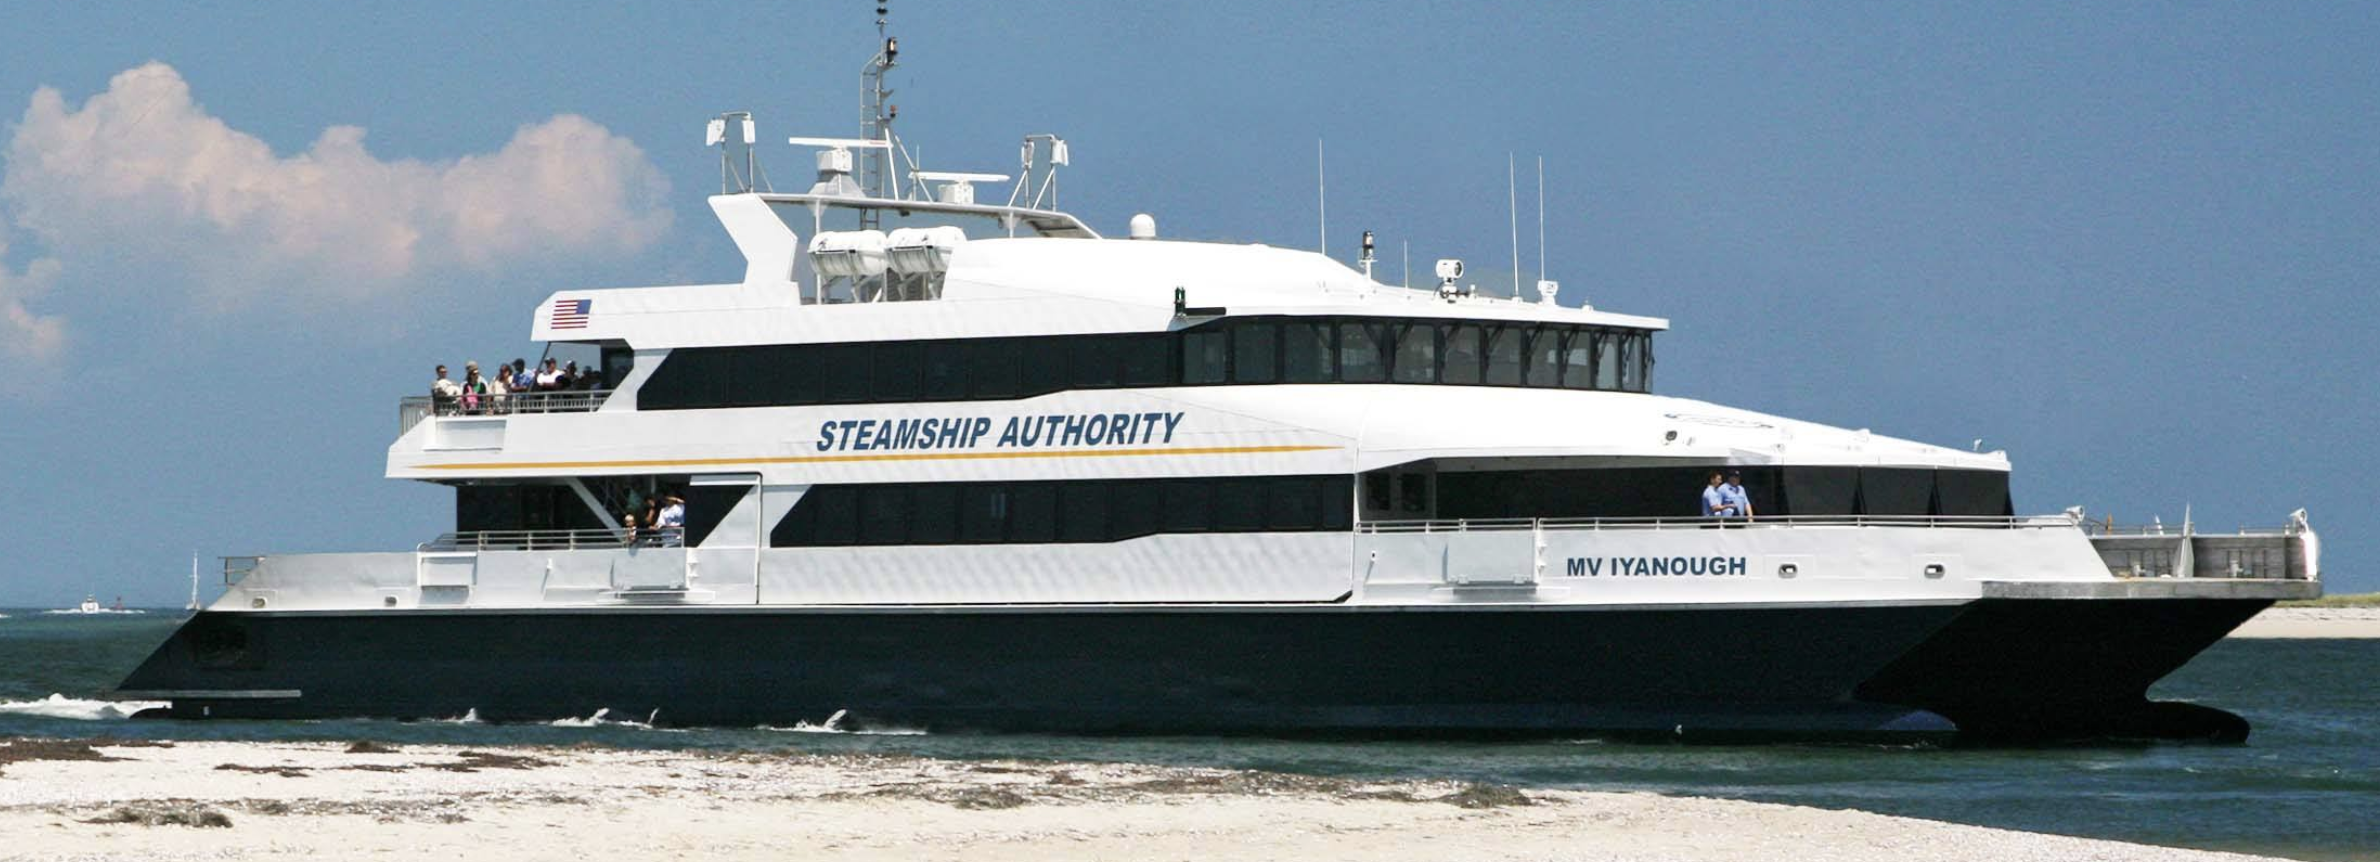 steamship authority 2019 reservation opening dates - ferry tickets